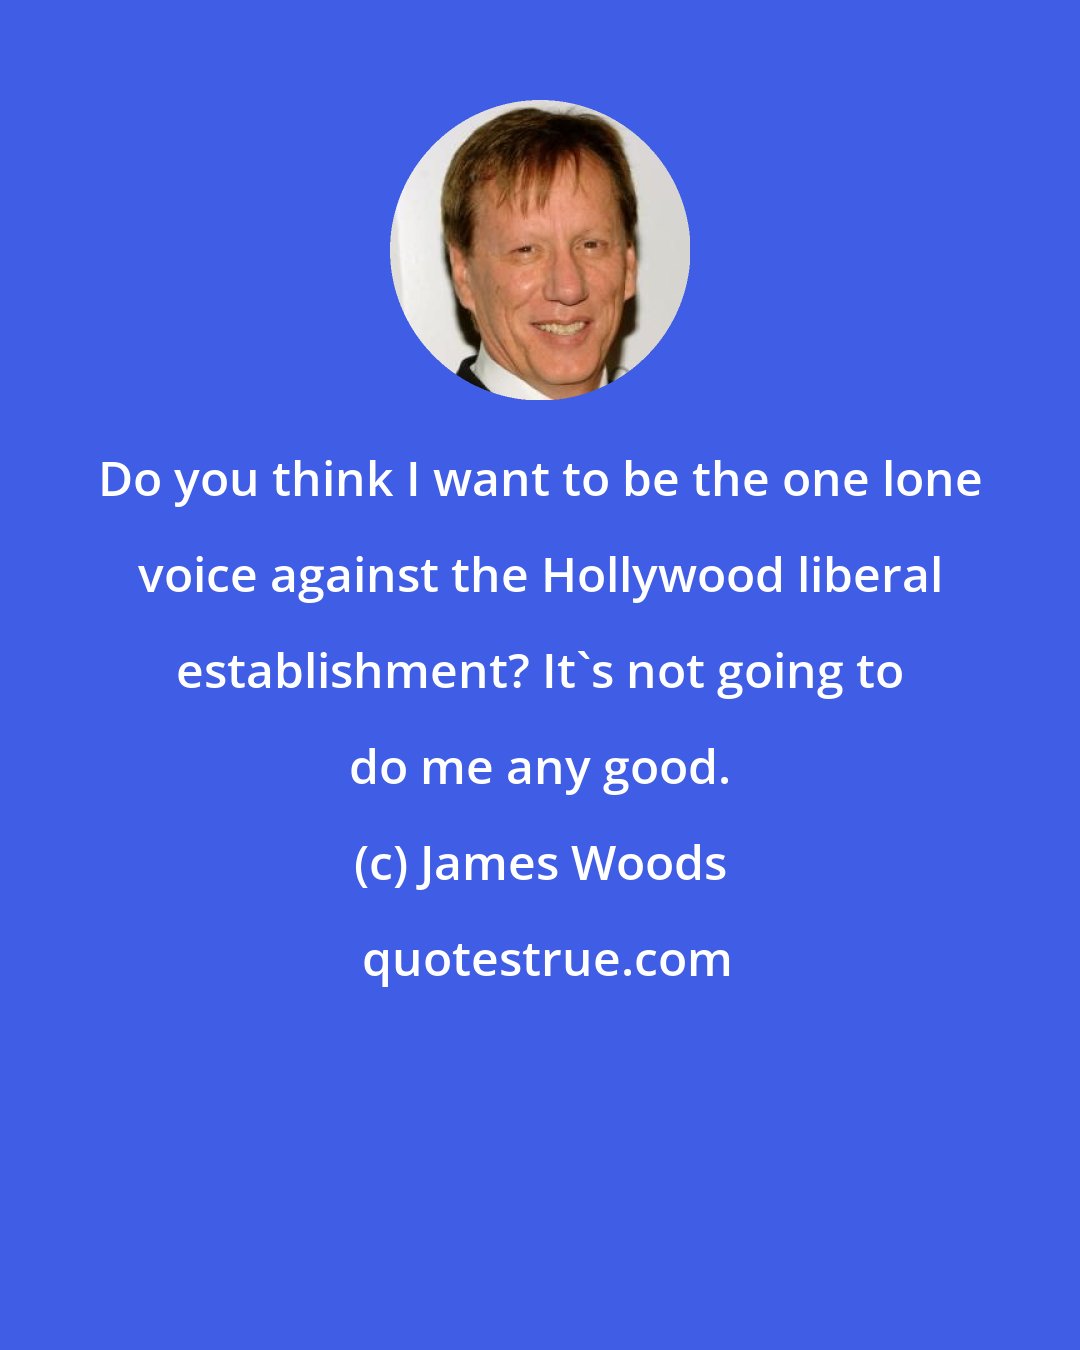 James Woods: Do you think I want to be the one lone voice against the Hollywood liberal establishment? It's not going to do me any good.